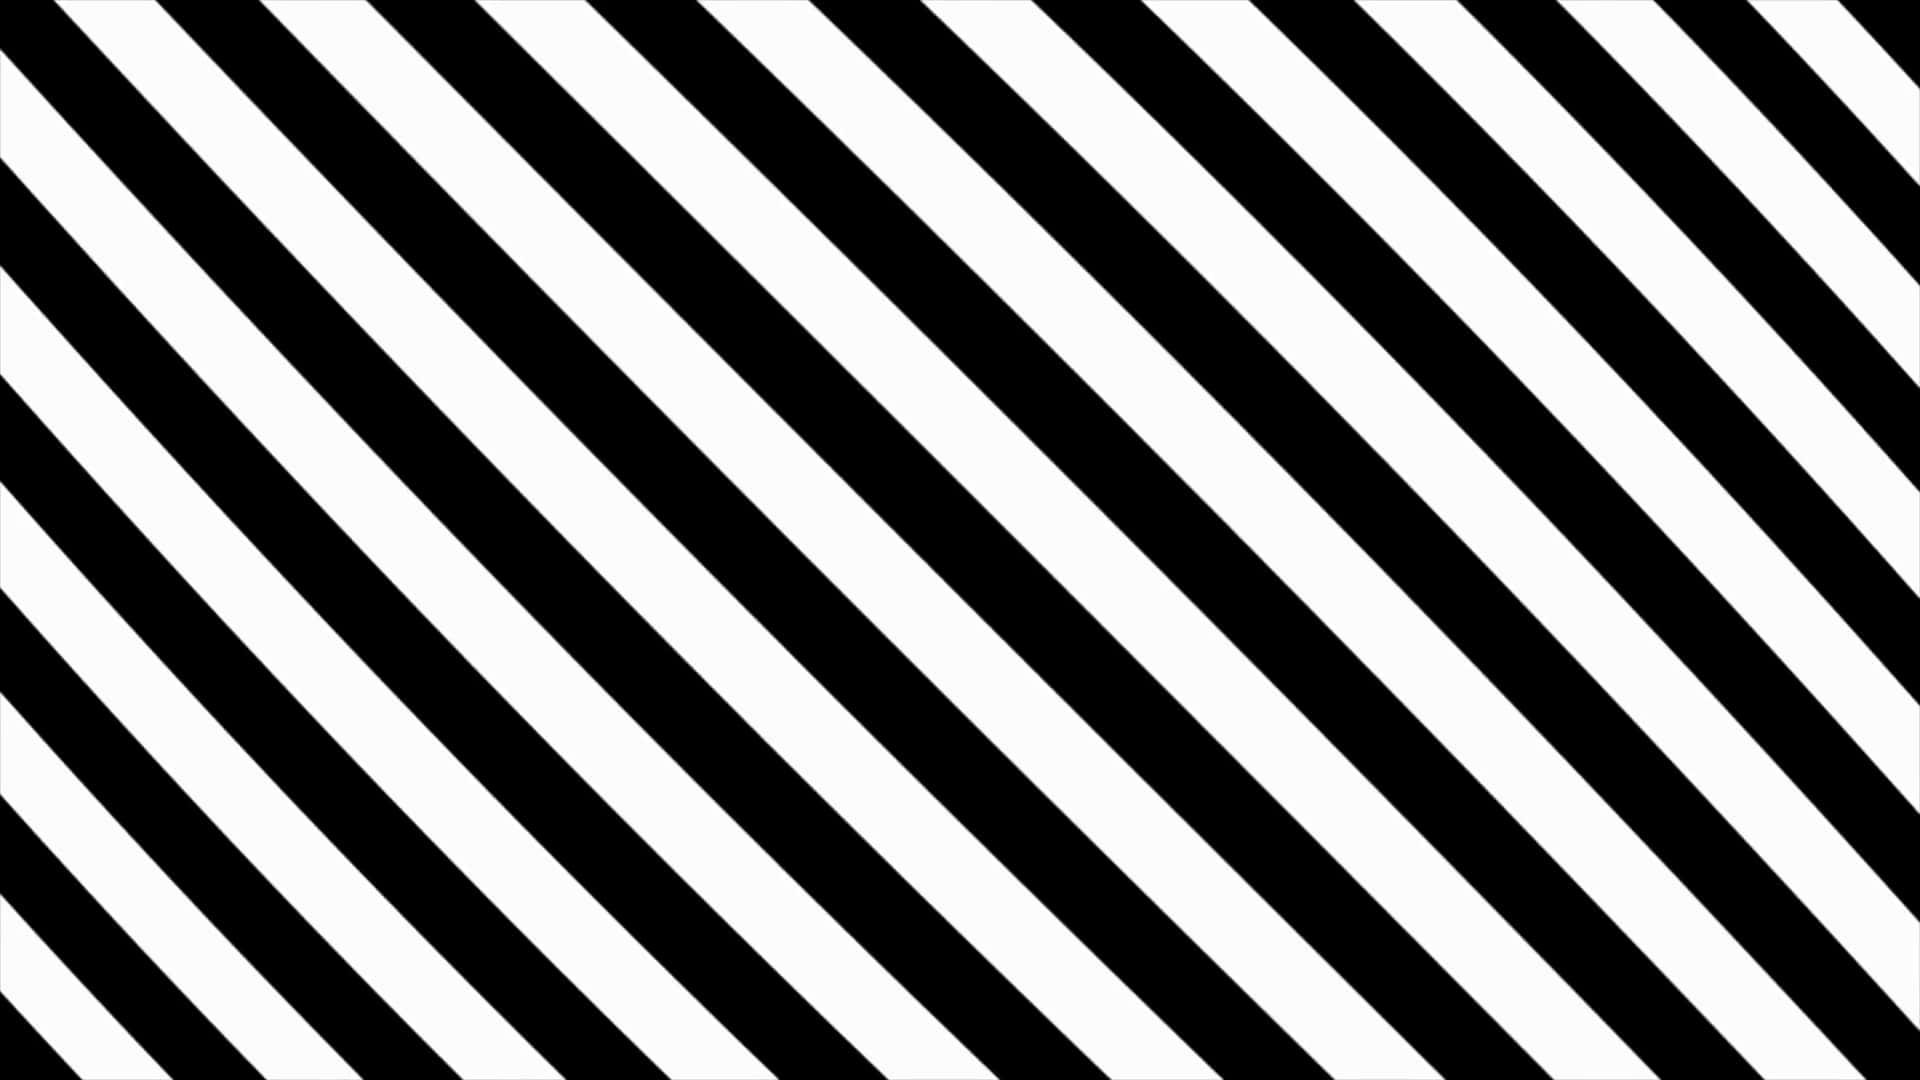 Bold, Simple and Striking Black and White Striped Pattern